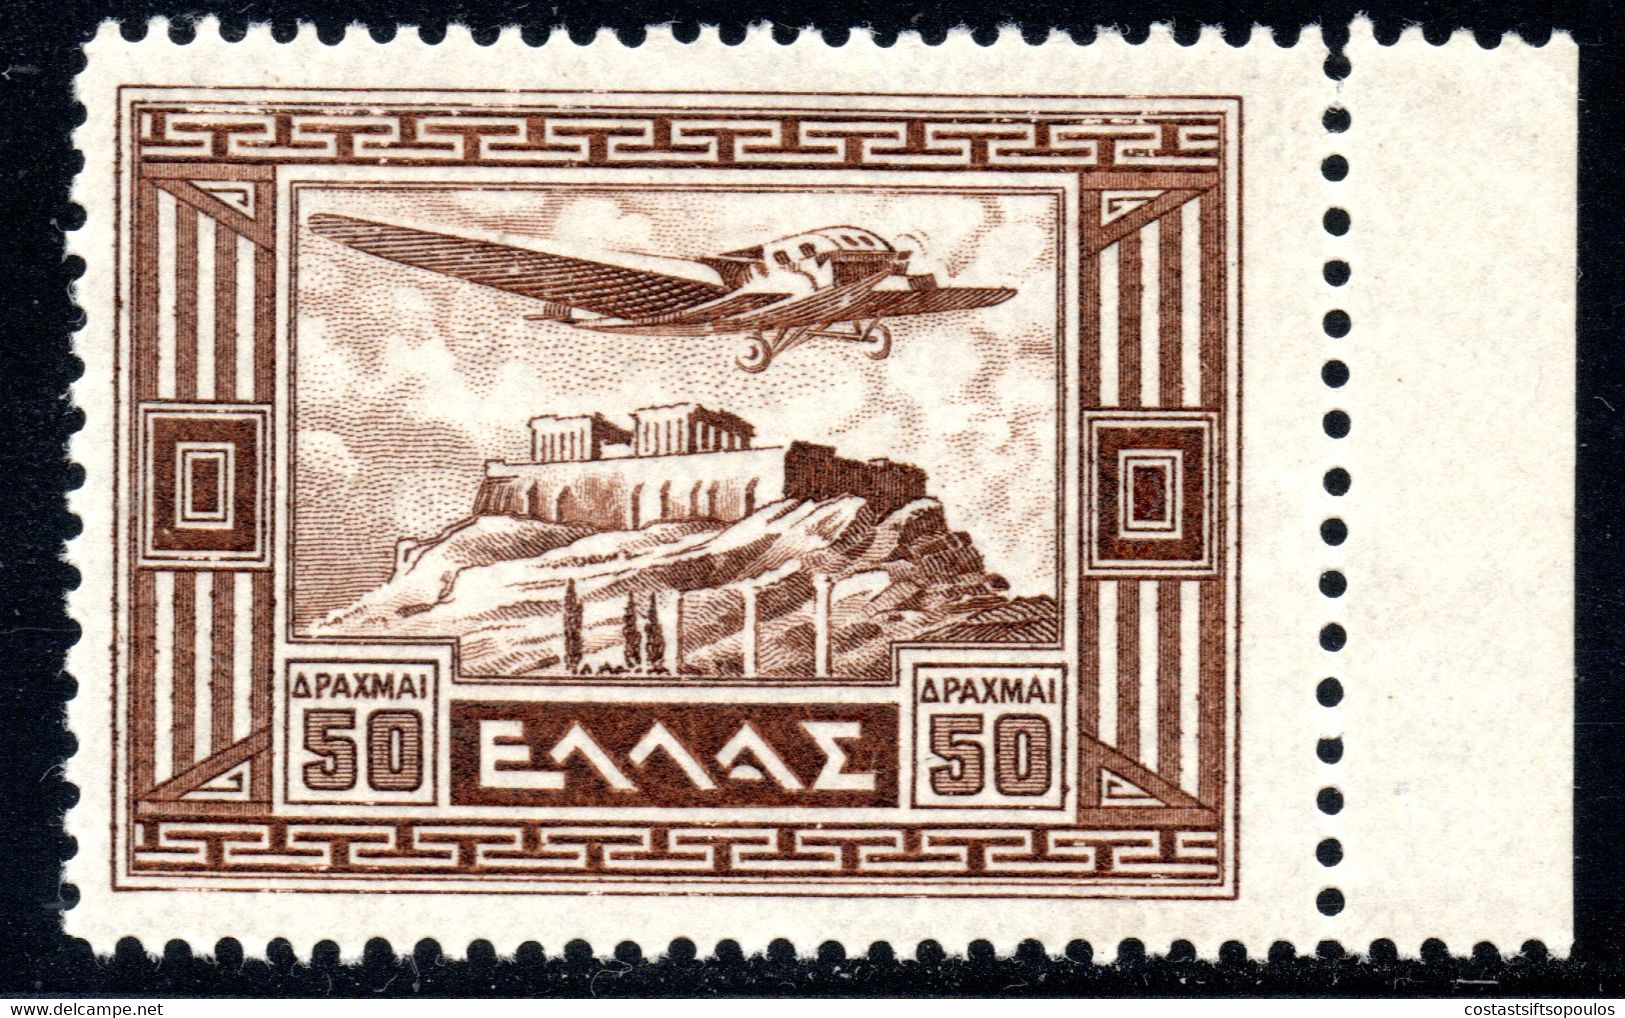 1413. GREECE 1933 AIR MAIL 50 DR. # 21 MNH. AIRPLANE OVER ACROPOLIS - Unused Stamps